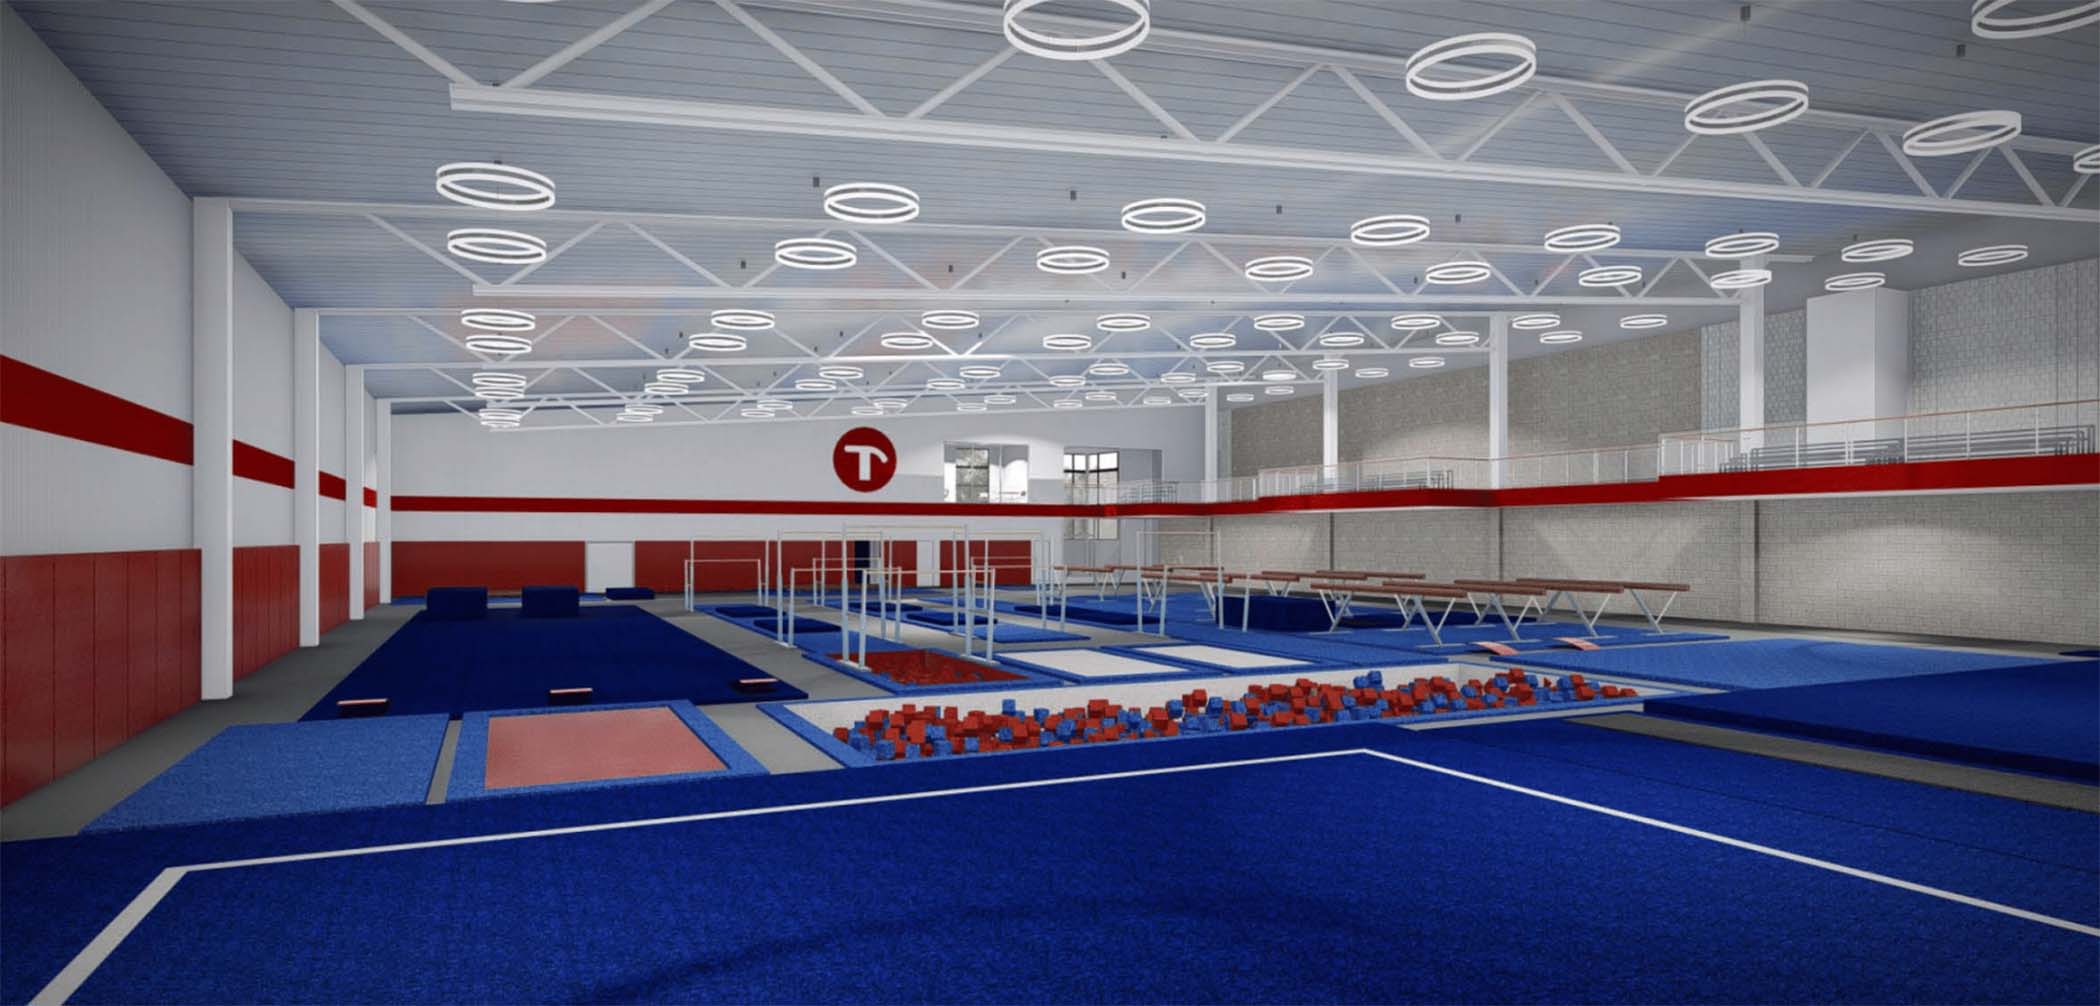 Plans announced for a new Trussville Academy of Gymnastics